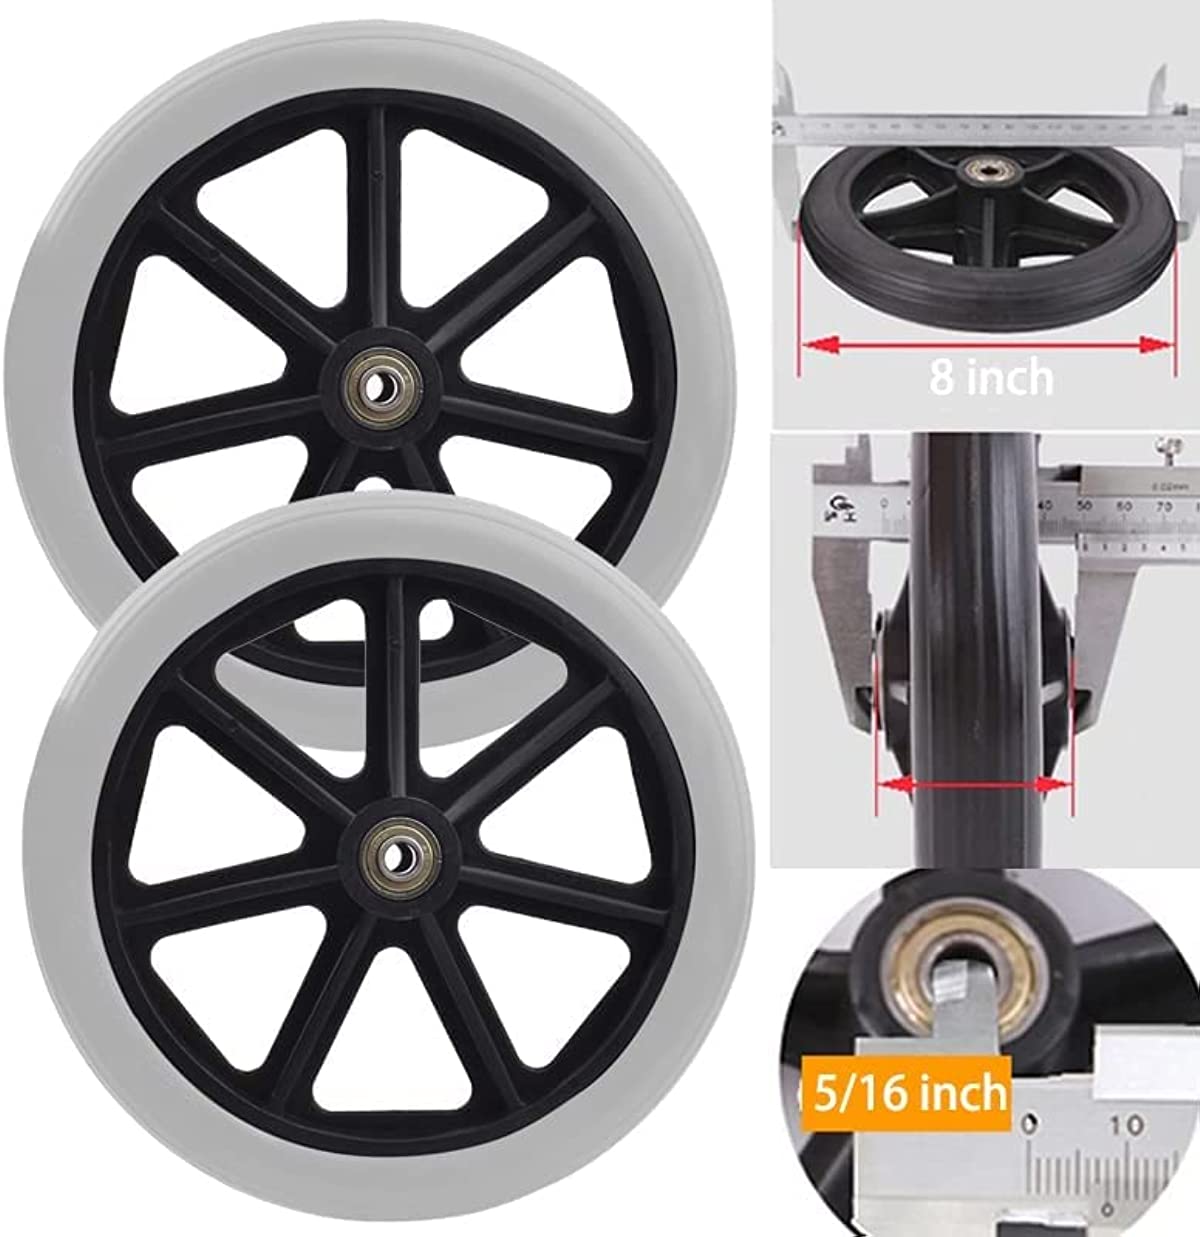 2PCs Wheels Replacement for Wheelchairs, 8\" x 1\" Rollator Wheels, Anti-Slip Replacement Casters Rollers Wheels Universal Wheelchair Replacement Wheel Accessories (Gray)